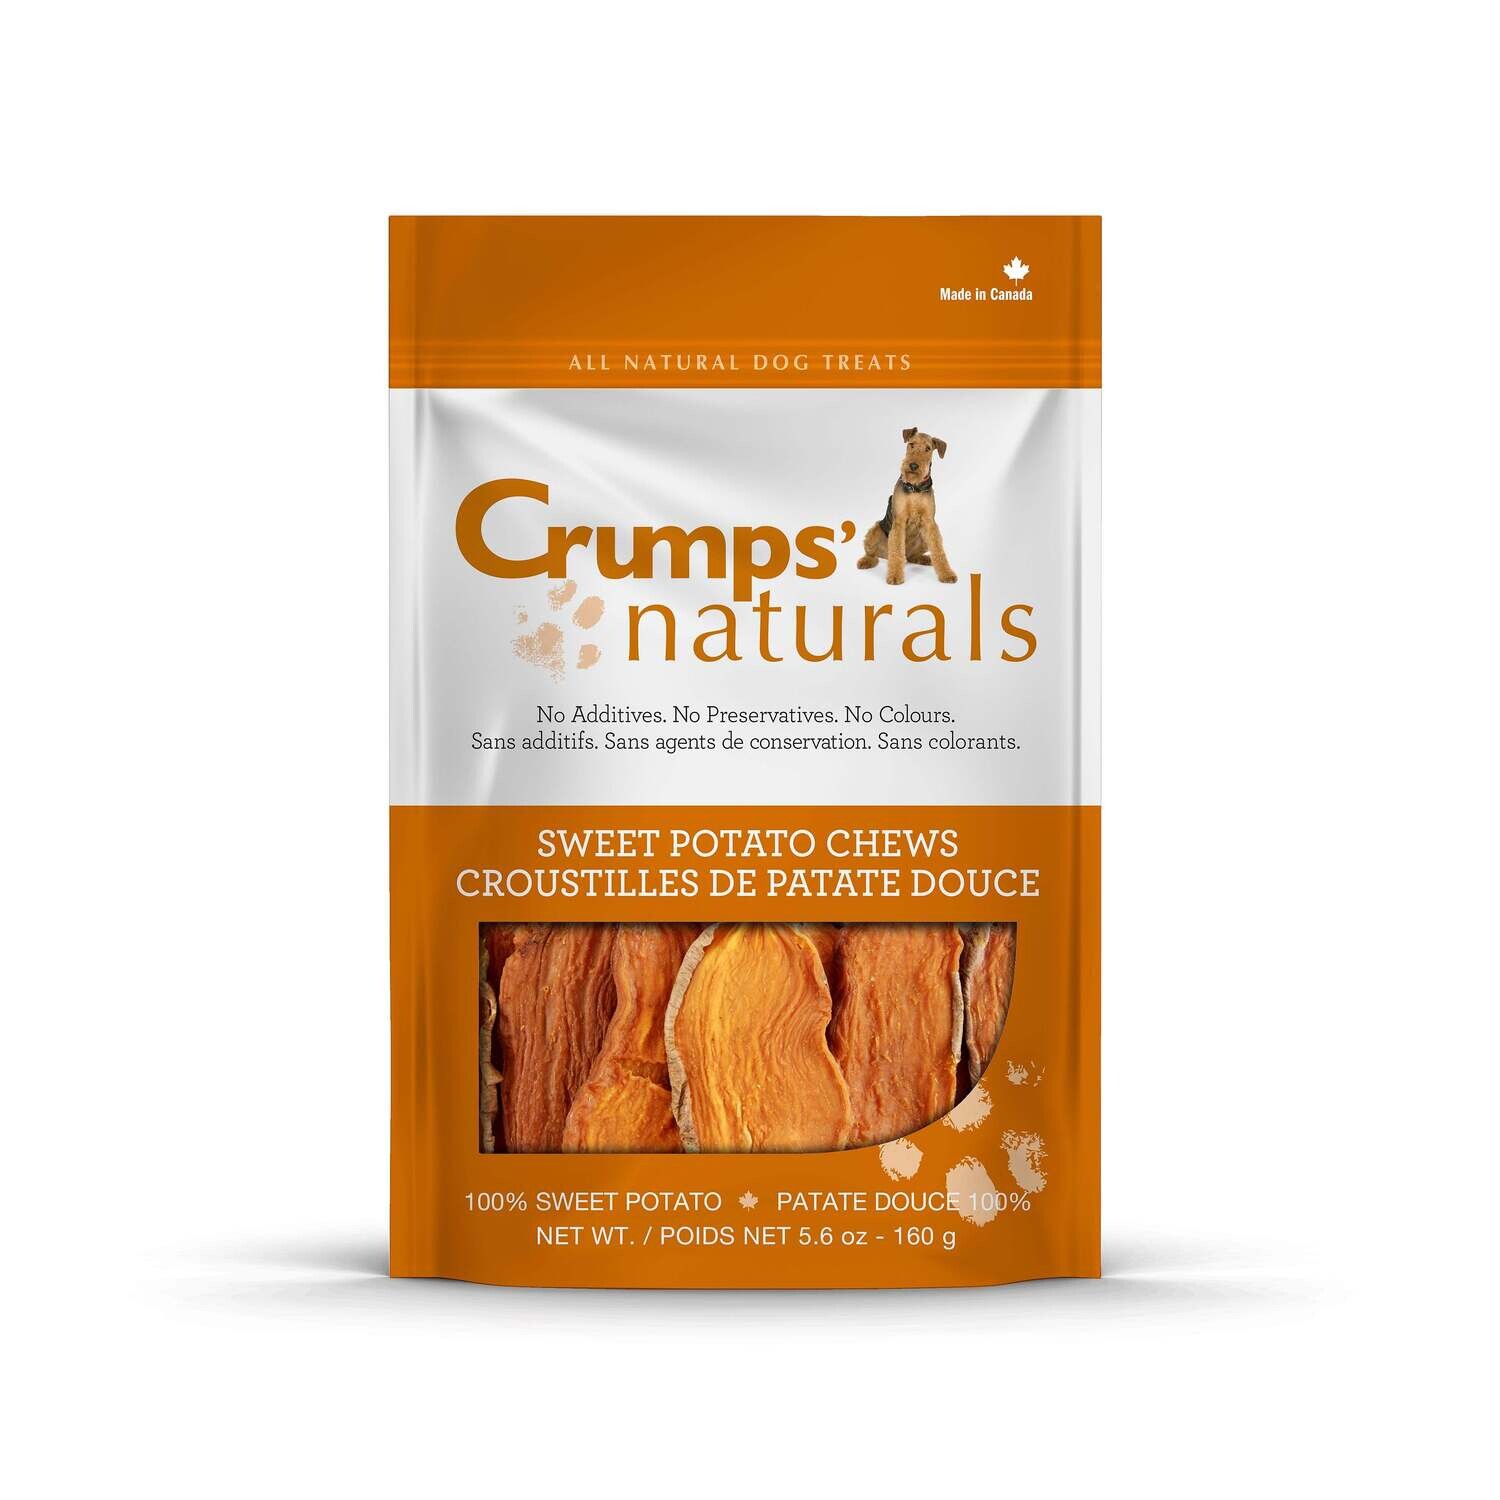 Crumps' Naturals Sweet Potato Chews for Dogs